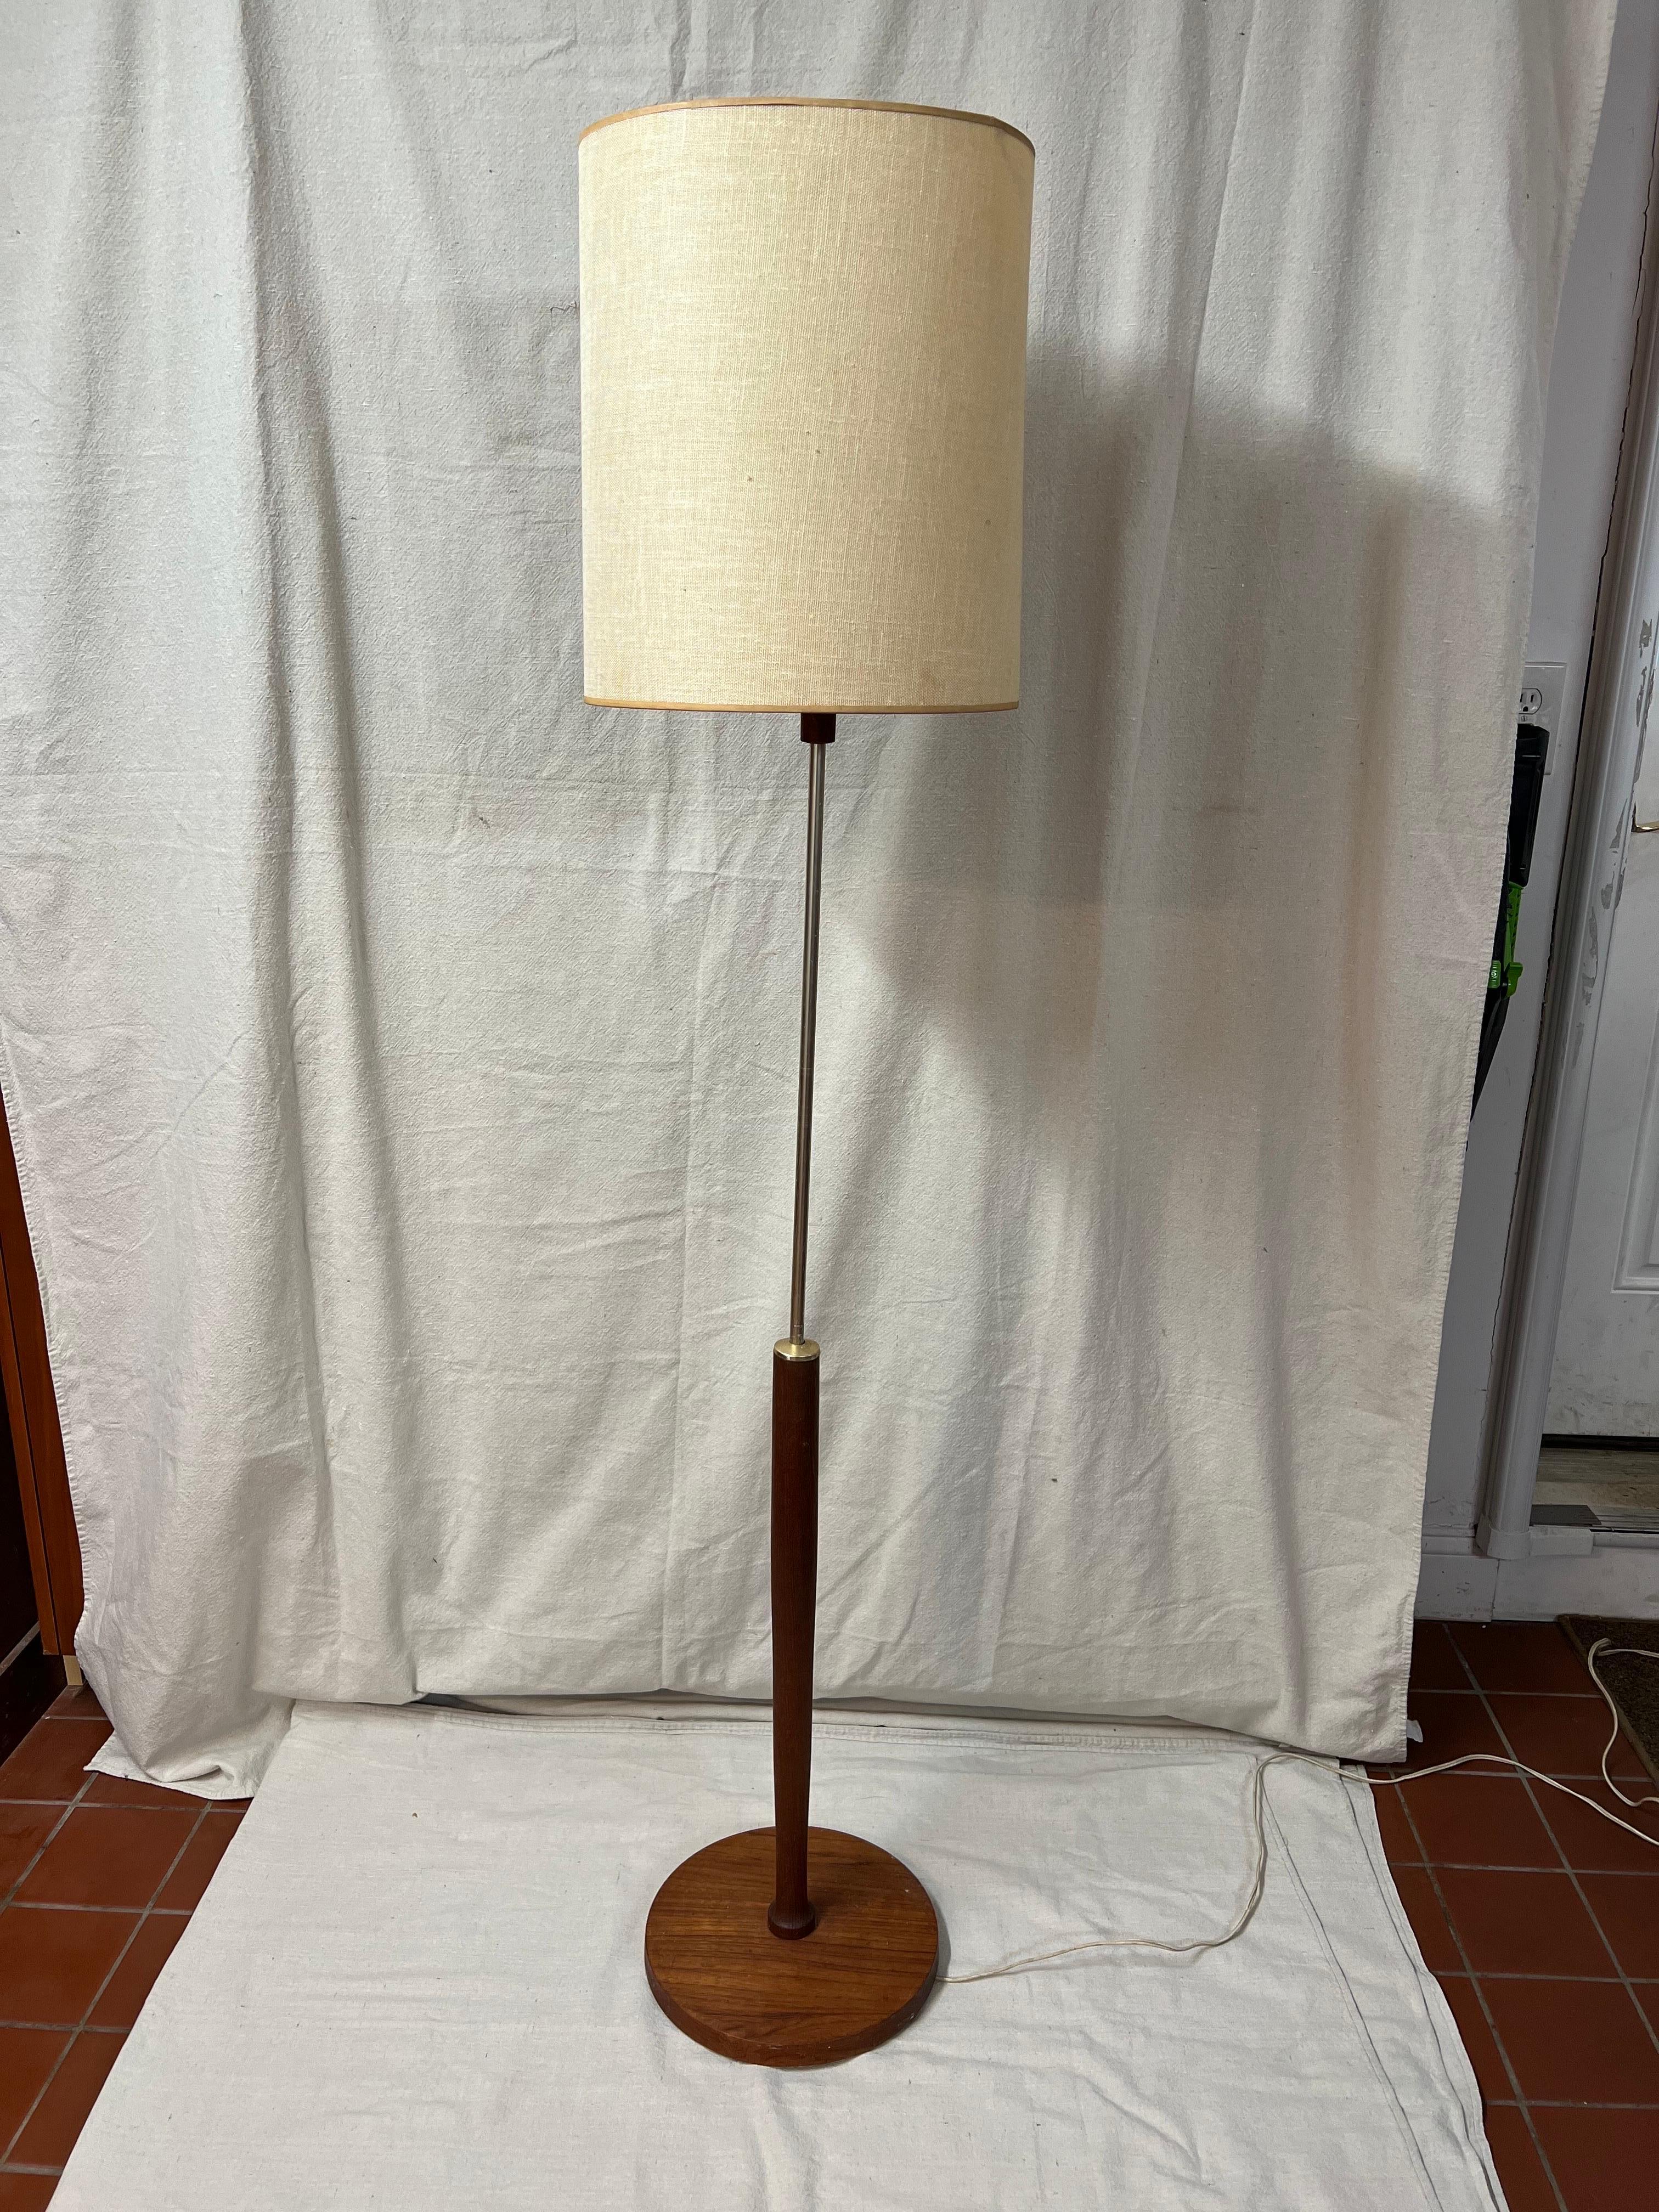 Mid-Century Modern Teak Floor Lamp. Thick walnut round base with aluminum neck and original paper shade. Iconic design in its organic simplicity. In the style of Gordon Martz and Jane Marshall.
Lamp base is 11